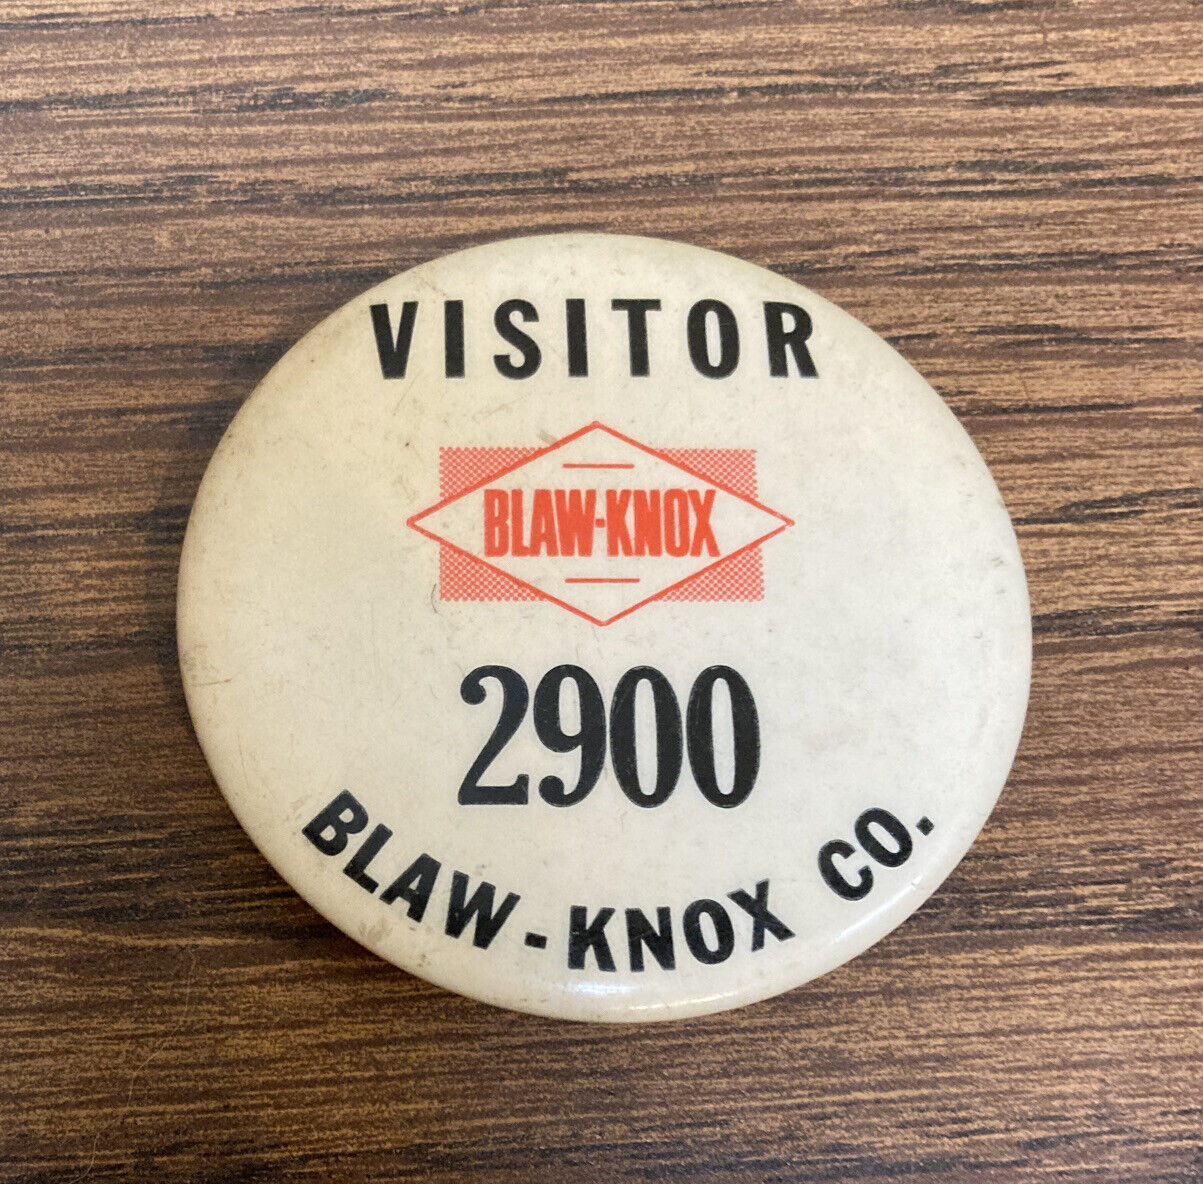 Vintage Visitor Blaw-Knox #2900 Button